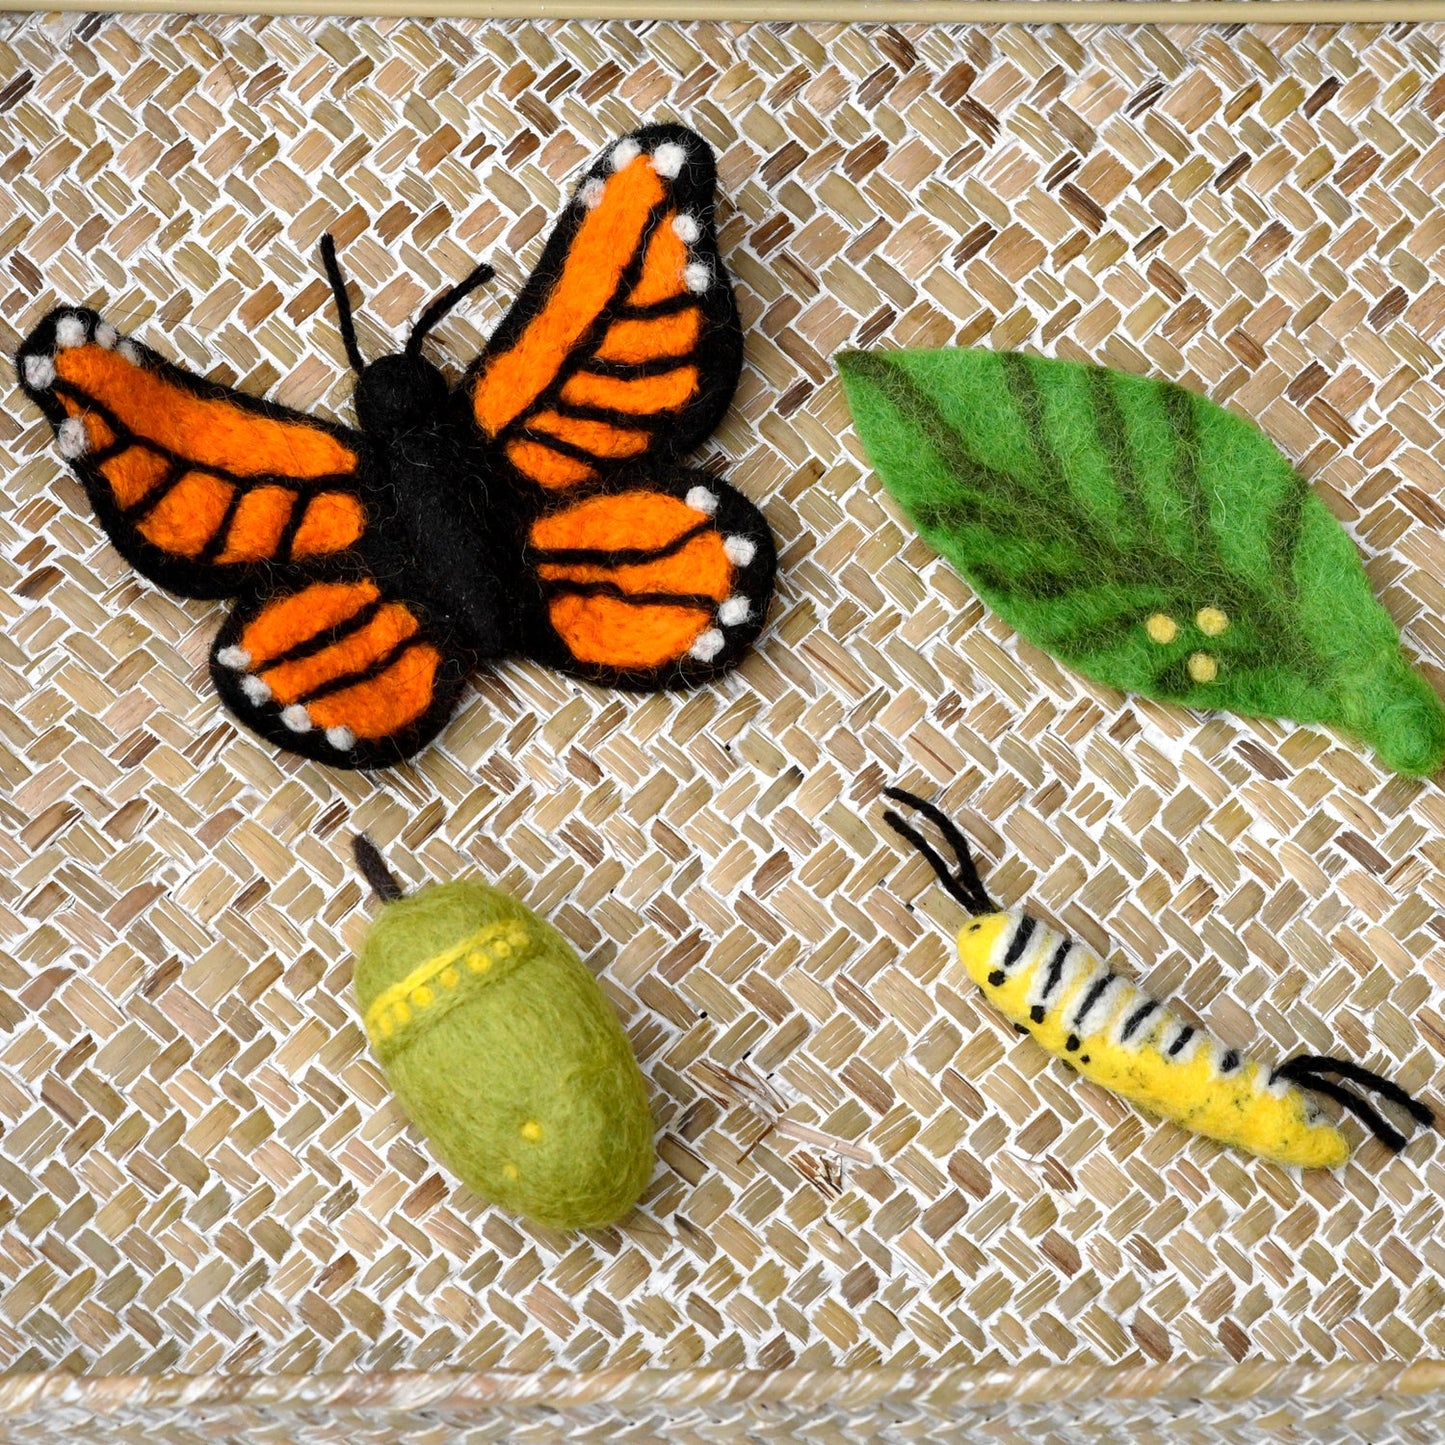 FELT LIFECYCLE OF MONARCH BUTTERFLY